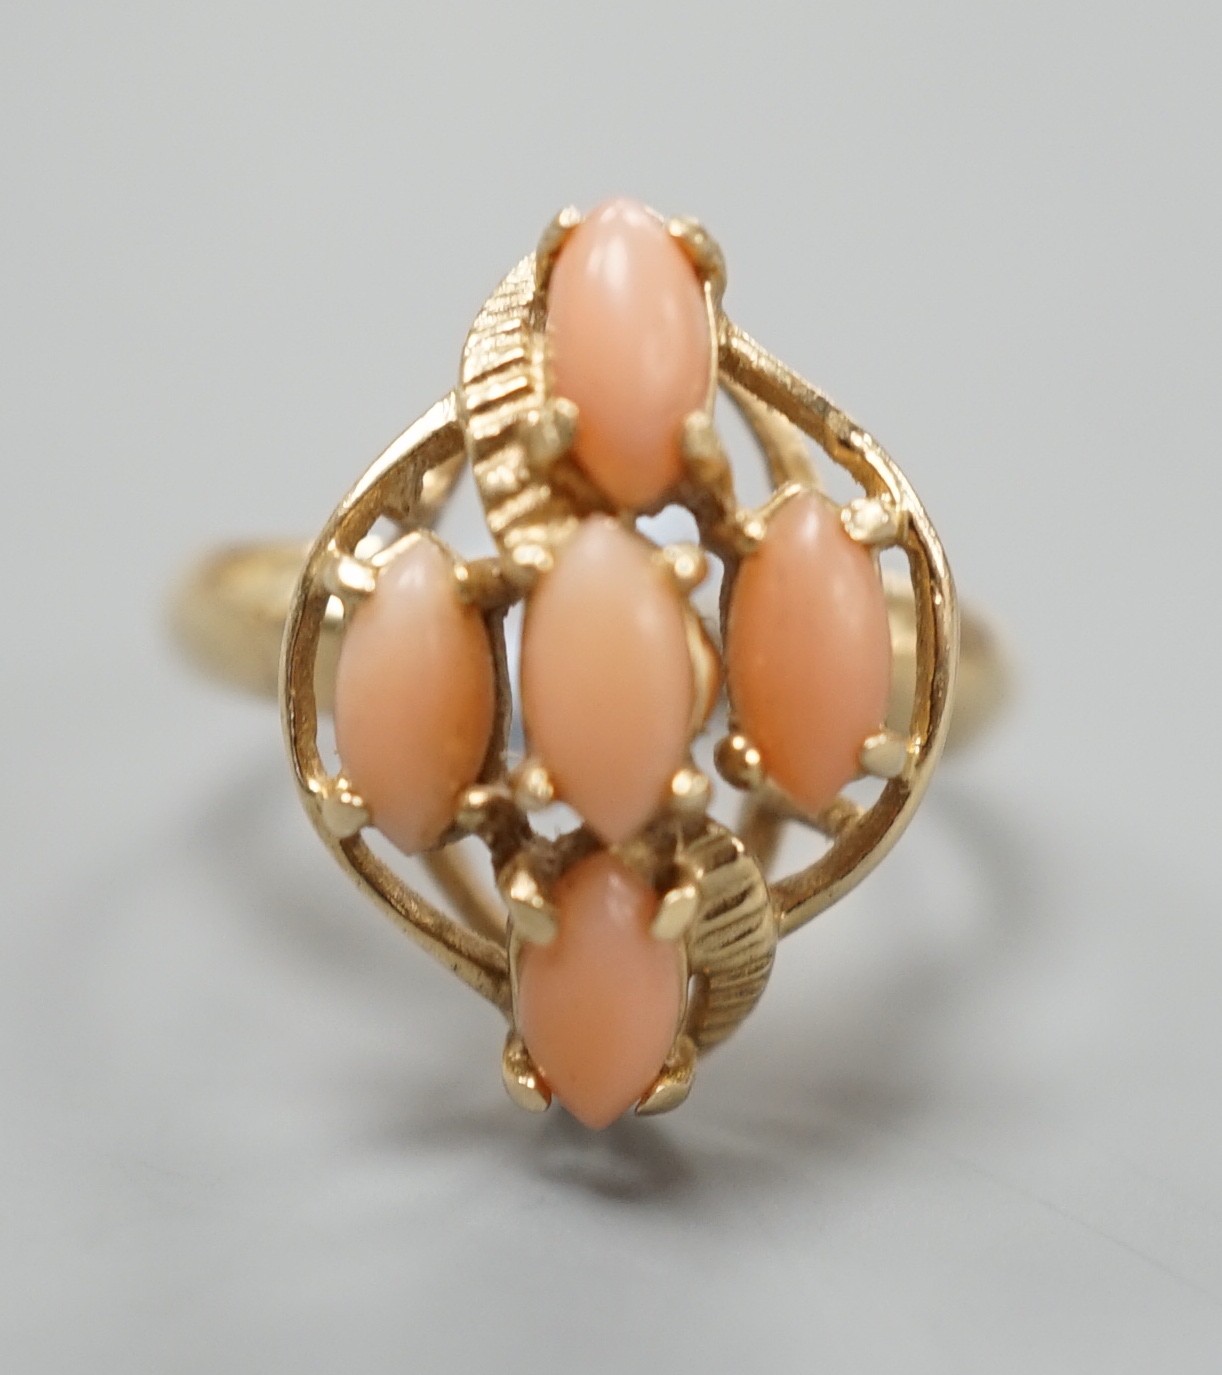 A modern 14k yellow metal and five stone oval coral bead set dress ring, size J/K, gross weight 2.9 grams.